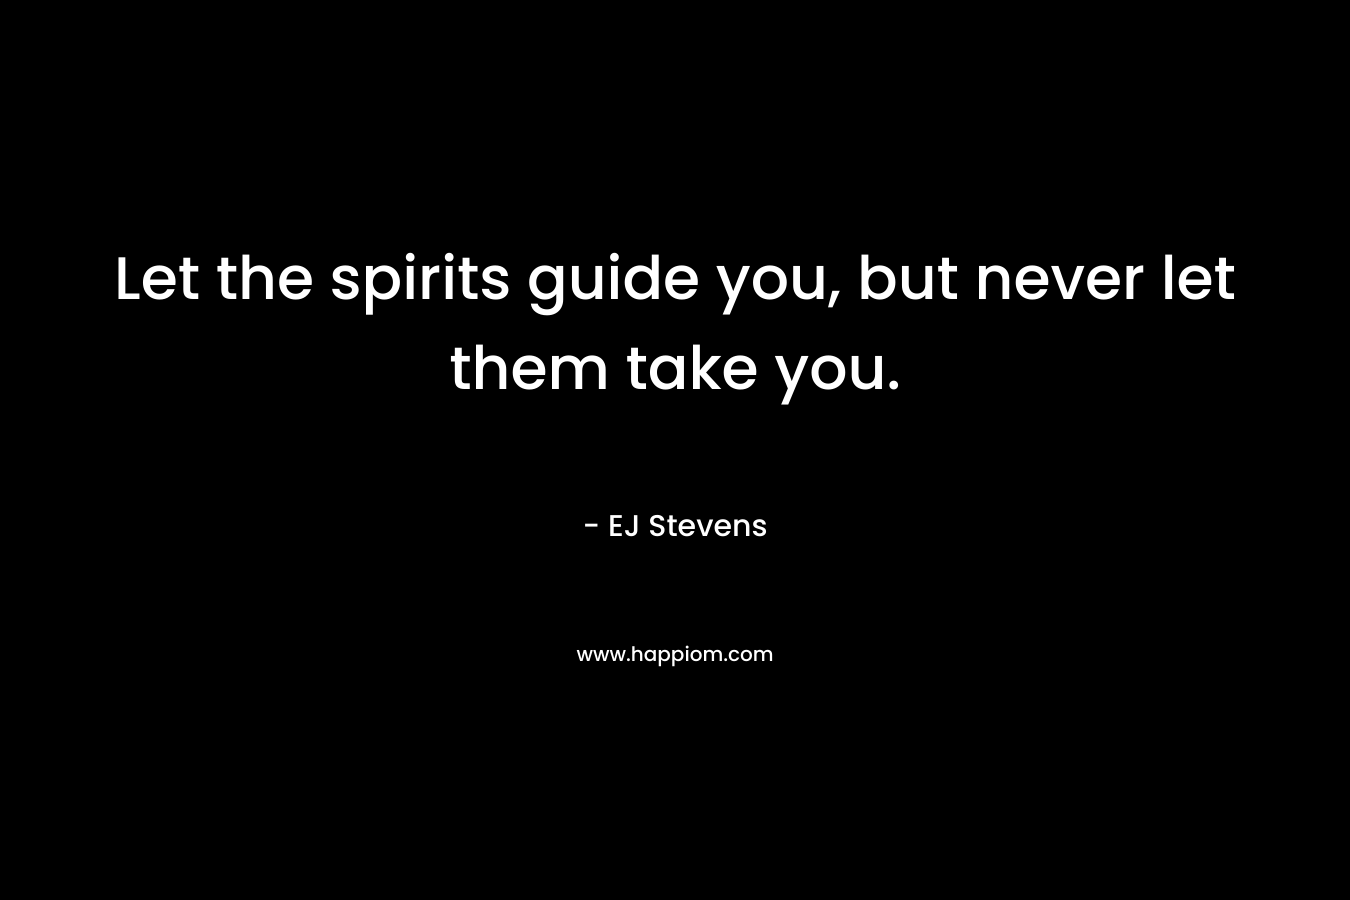 Let the spirits guide you, but never let them take you.